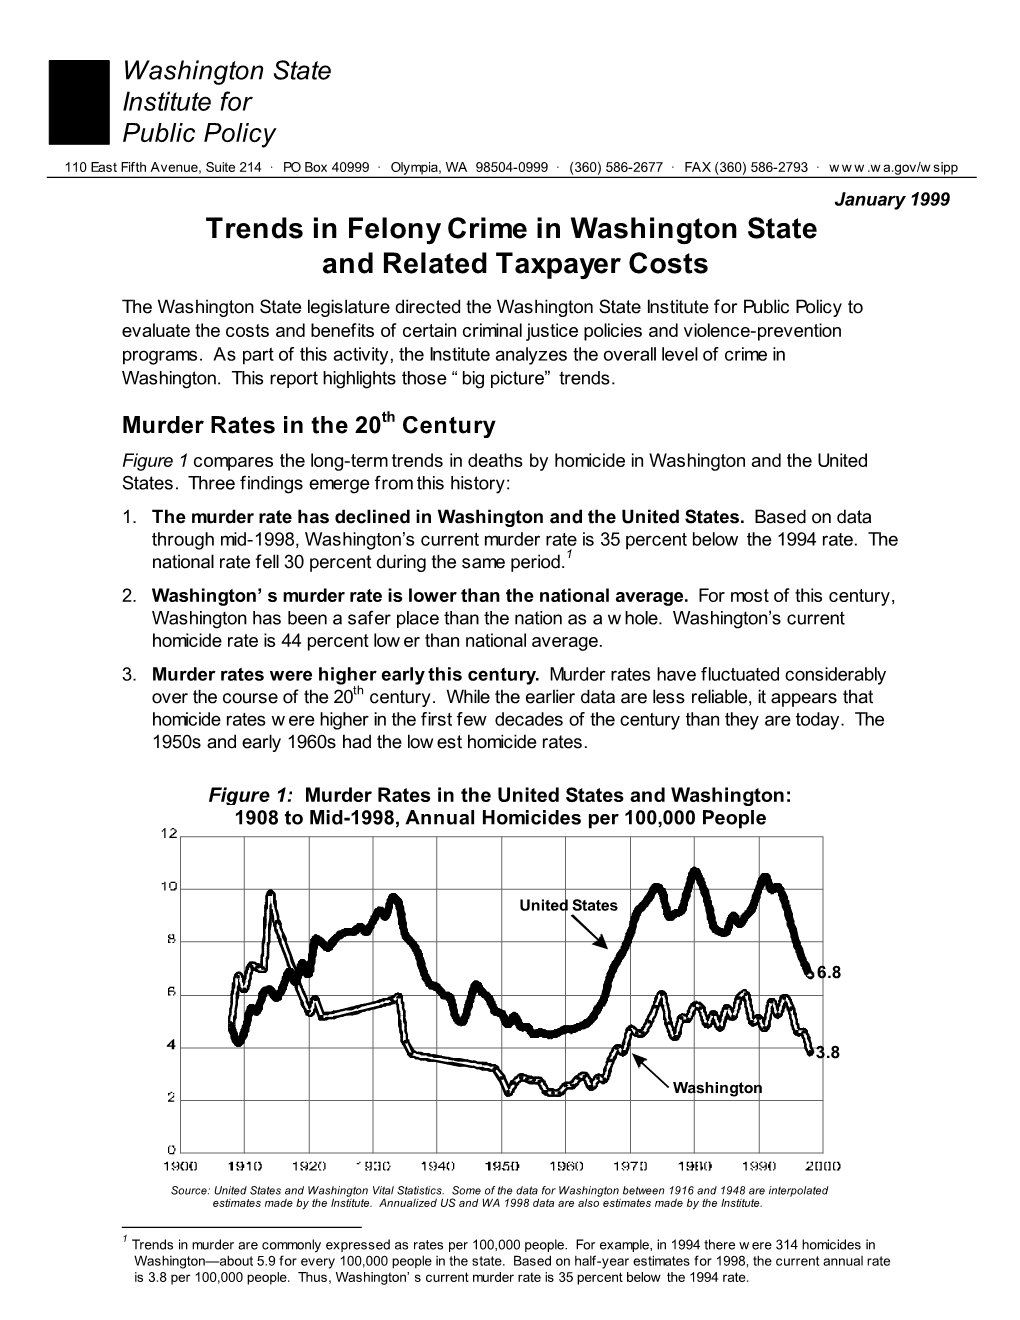 Trends in Felony Crime in Washington State and Related Taxpayer Costs